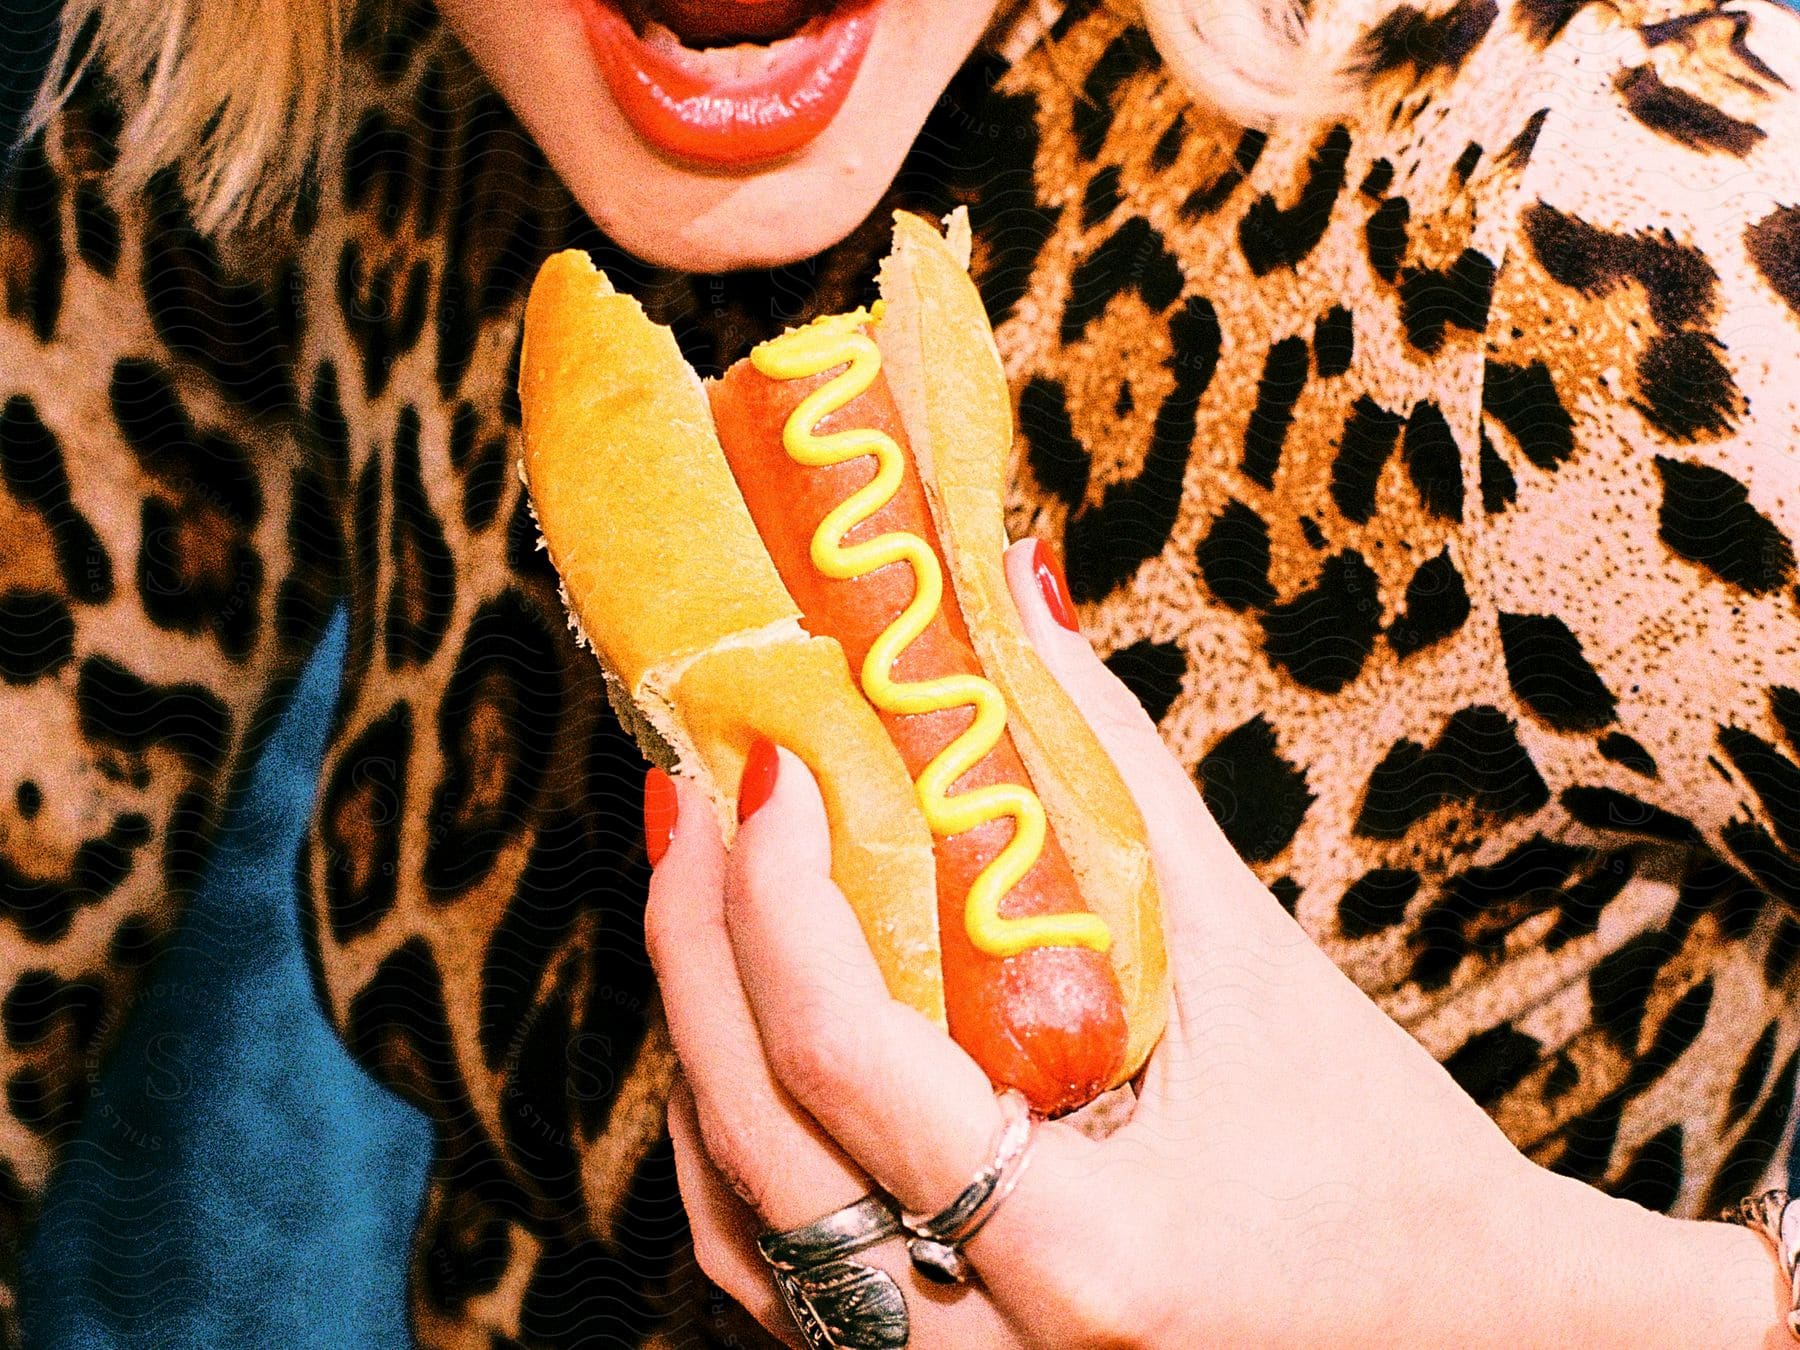 Stock photo of woman brings an already-bitten hotdog with mustard on it closer to her open mouth with her left hand.